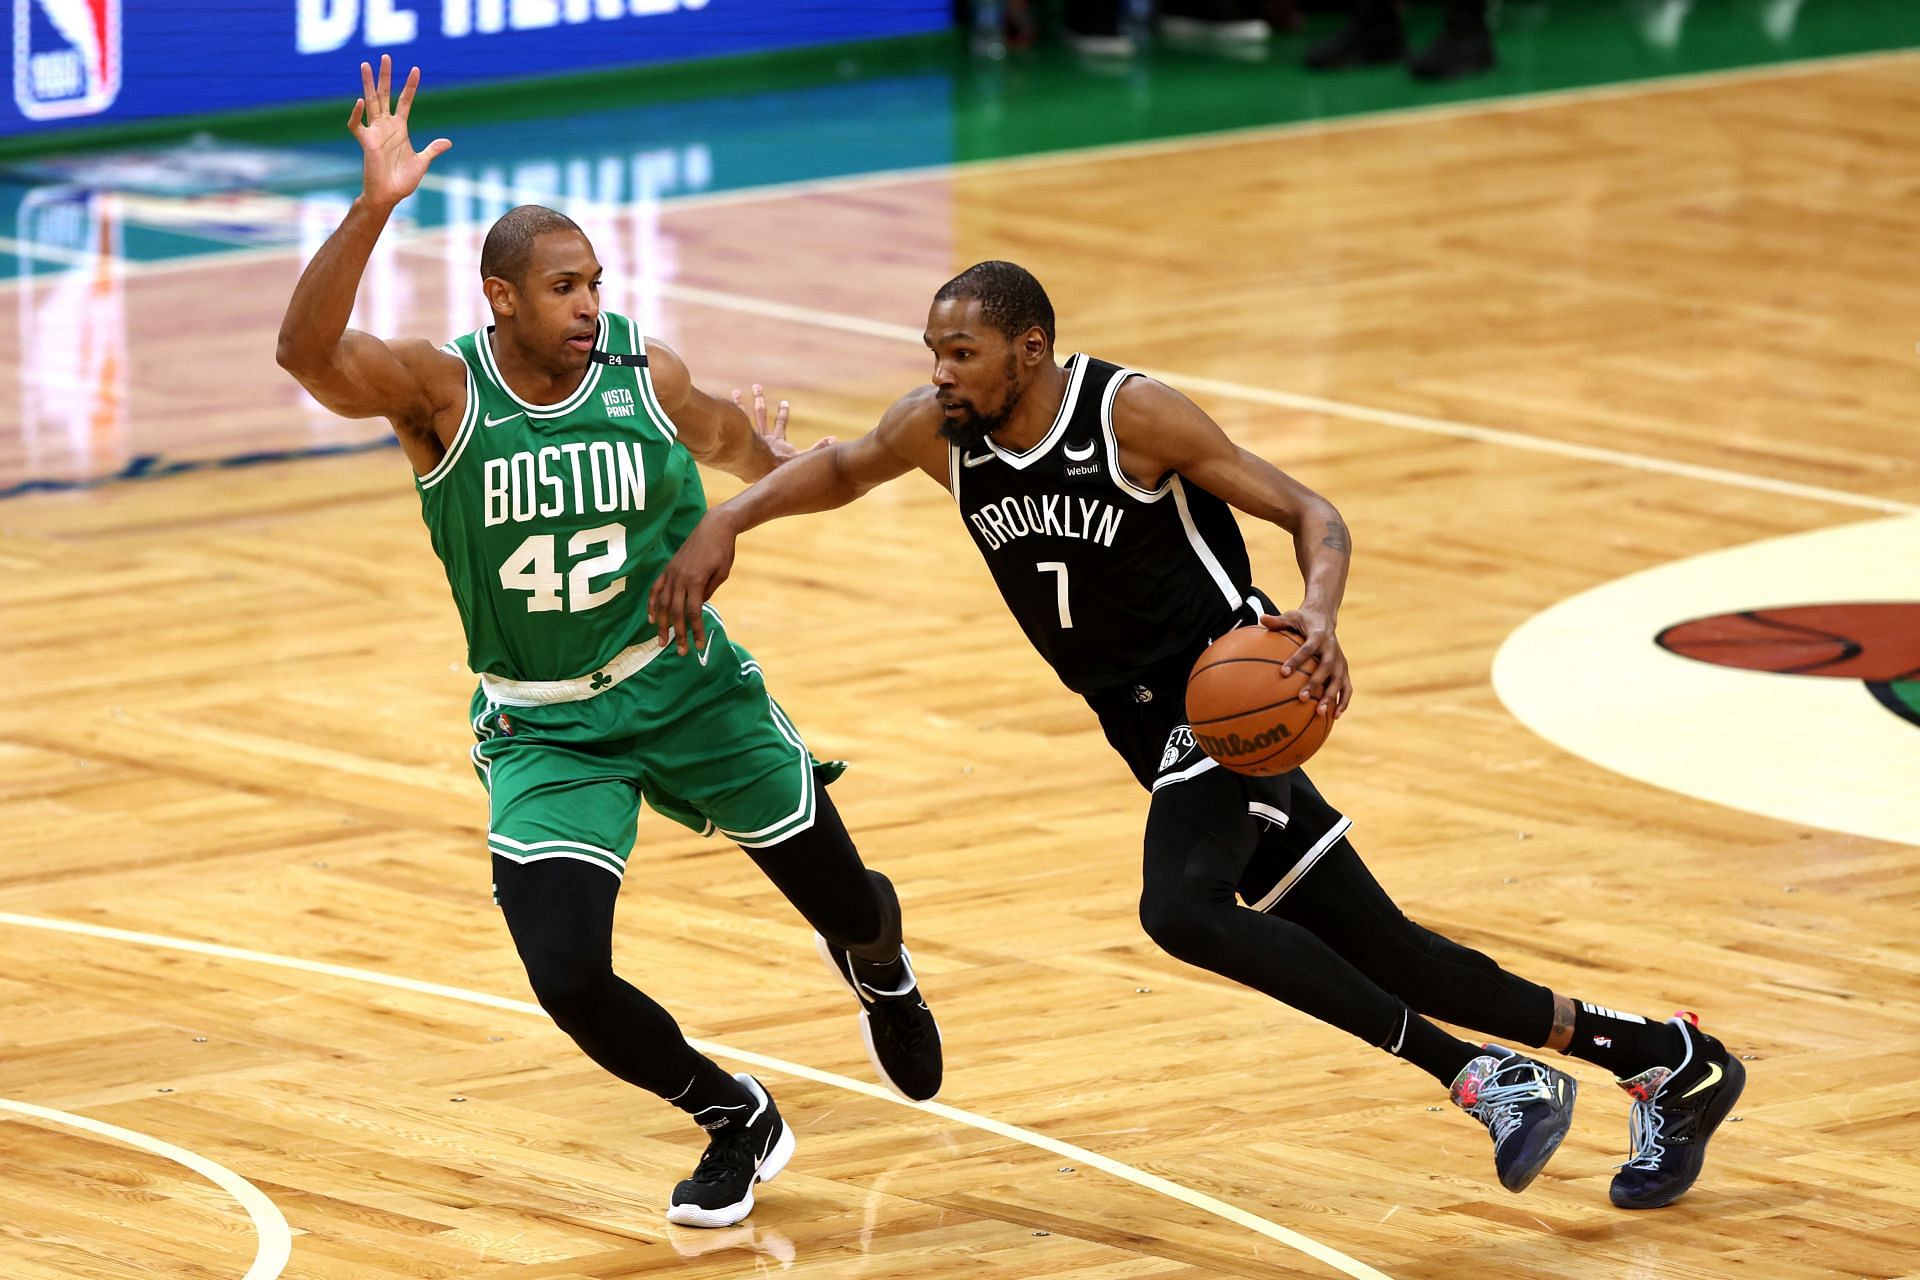 Kevin Durant of the Brooklyn Nets drives toward the basket against Al Horford of the Boston Celtics.